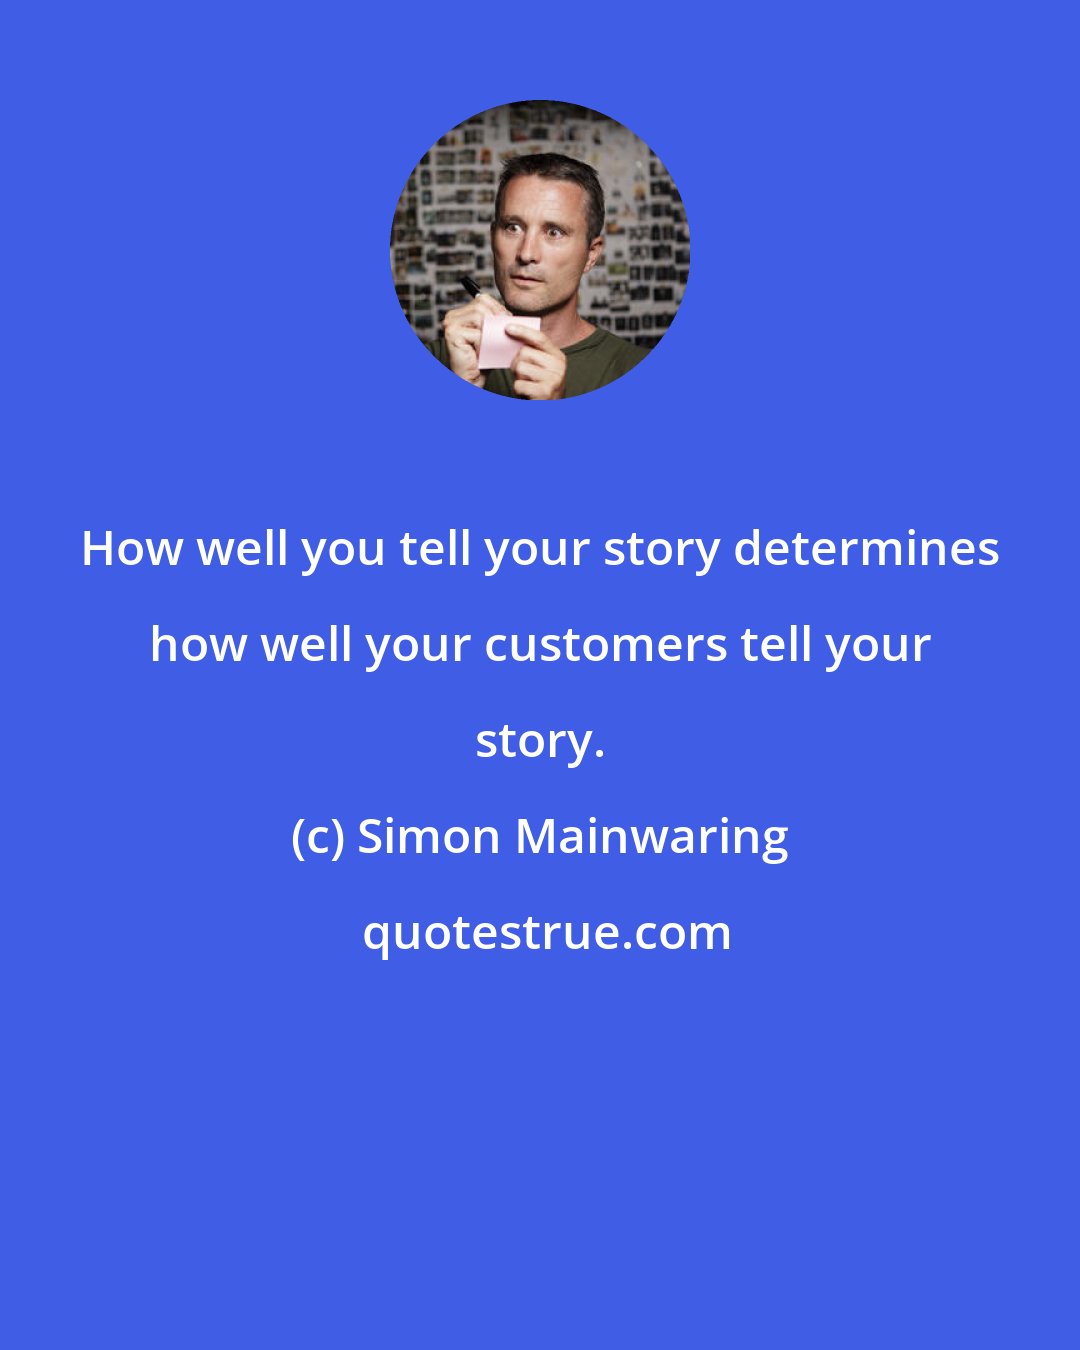 Simon Mainwaring: How well you tell your story determines how well your customers tell your story.